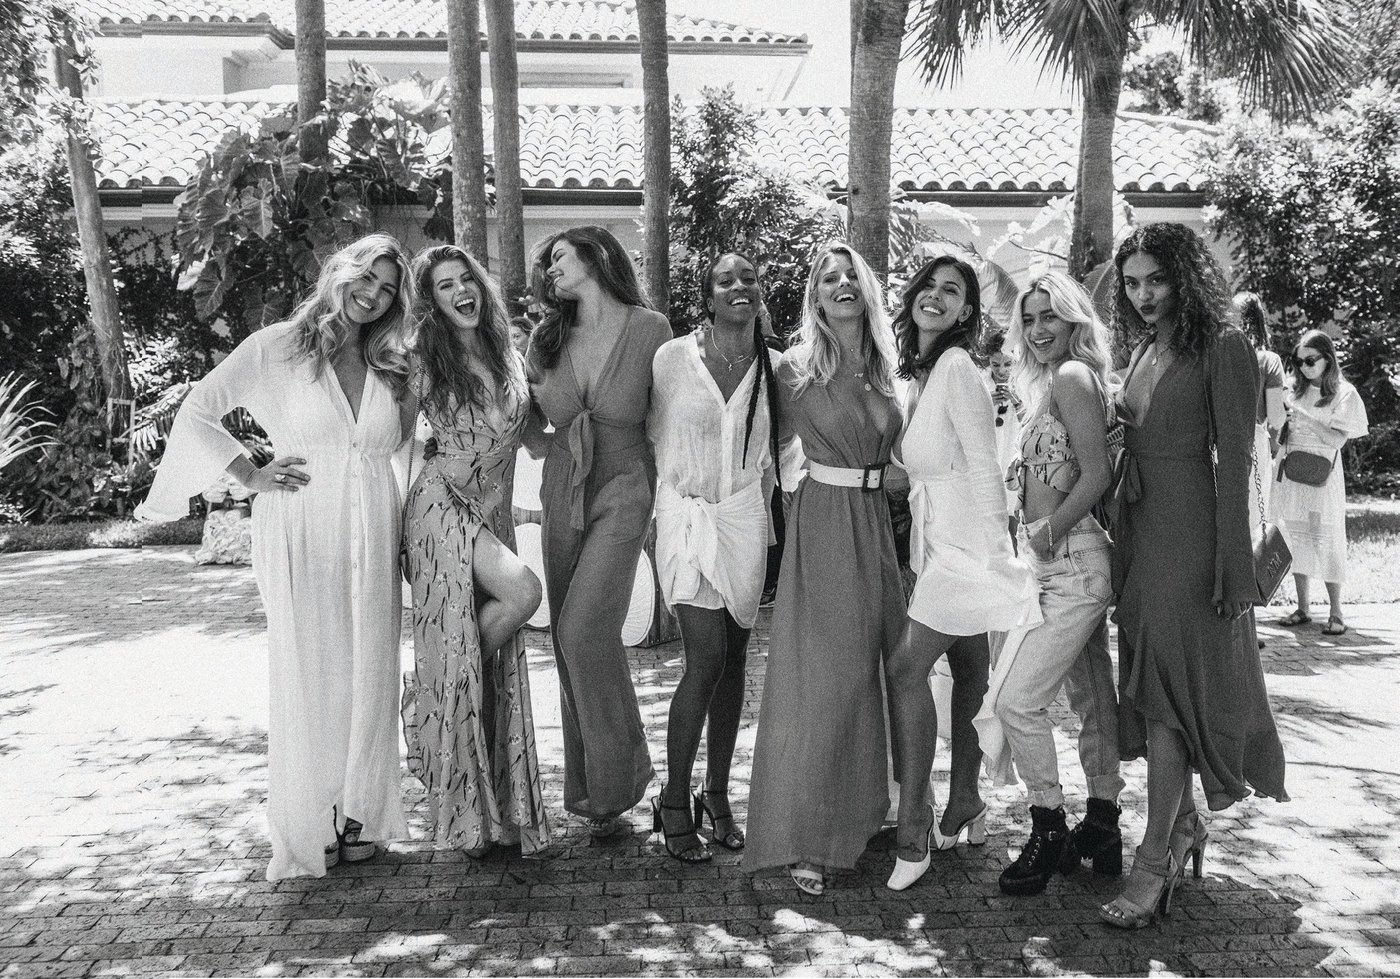 Group of girls including Tash Oakley and Devin Brugman of Monday Swimwear at Paraiso Miami Beach Swim Week PHOTO COURTESY OF PARAISO MIAMI BEACH